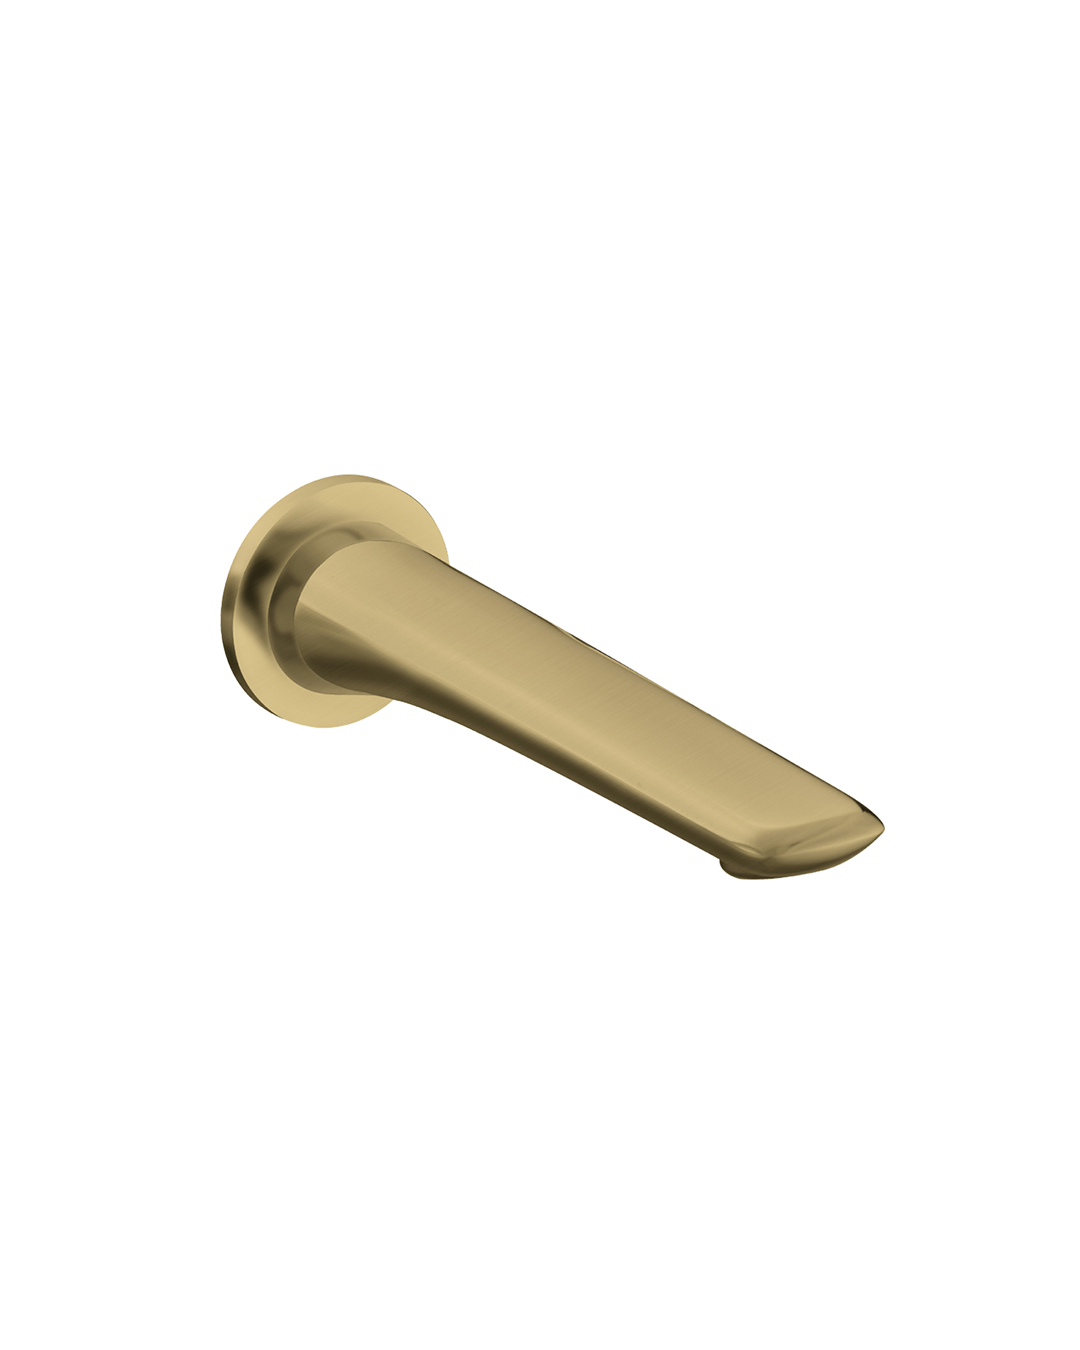 water spout brushed yellow gold